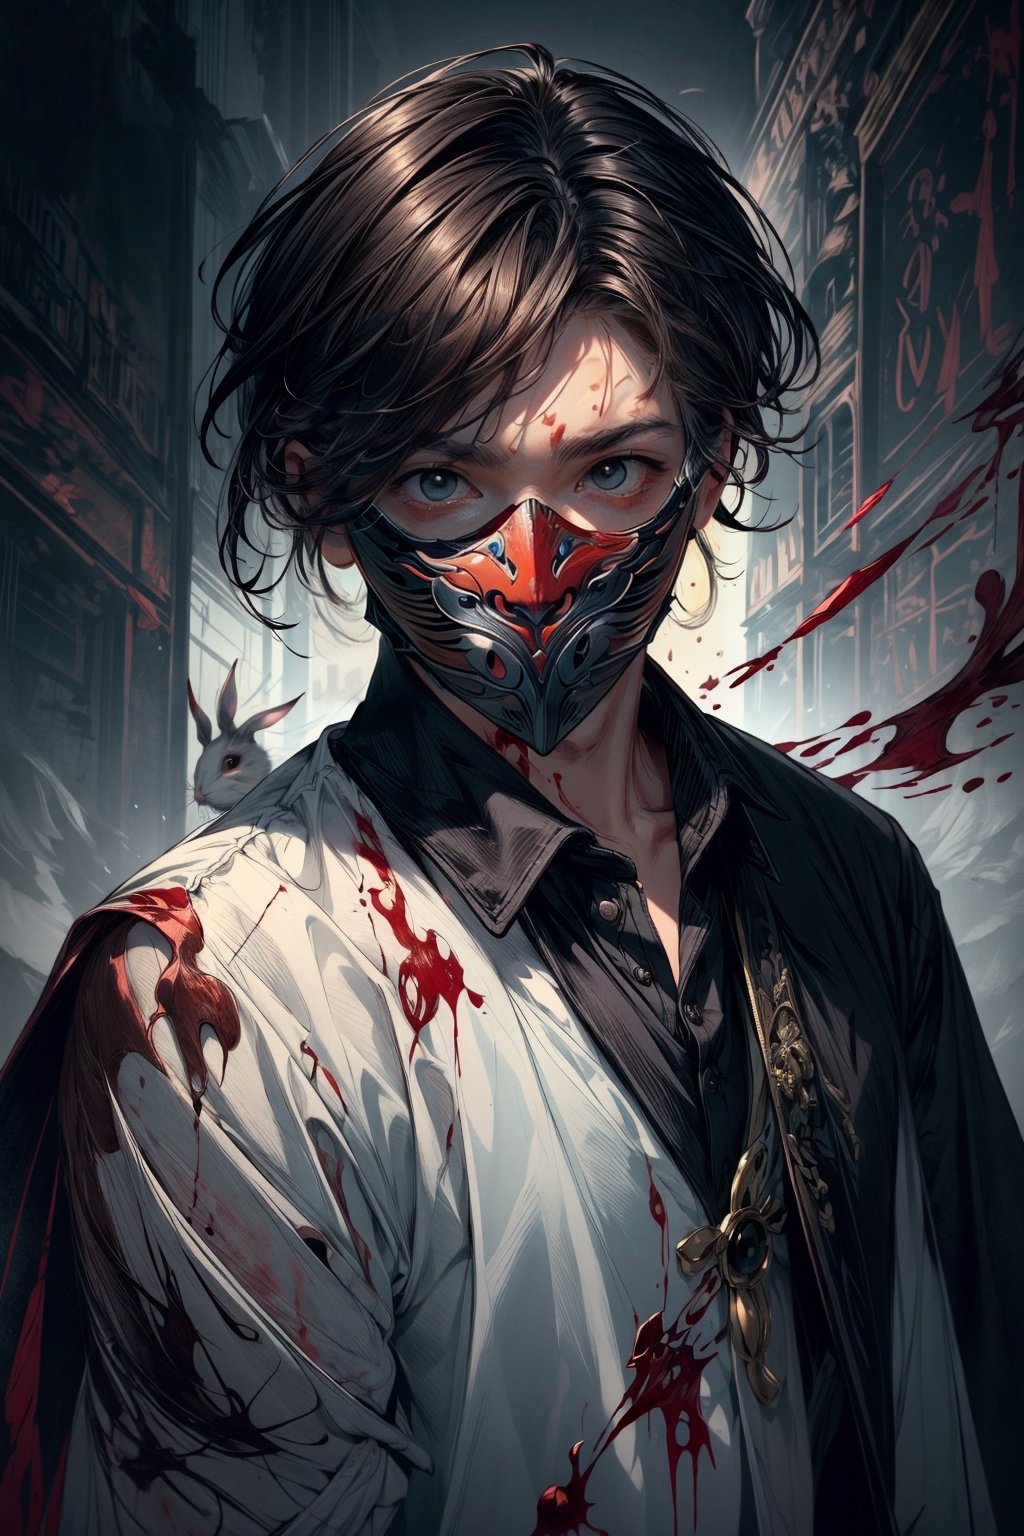 A boy with short dark brown hair, wearing a (mask that covers his entire rabbit Killer face with blood), dramatic lighting, simple and common clothes, portrait format.